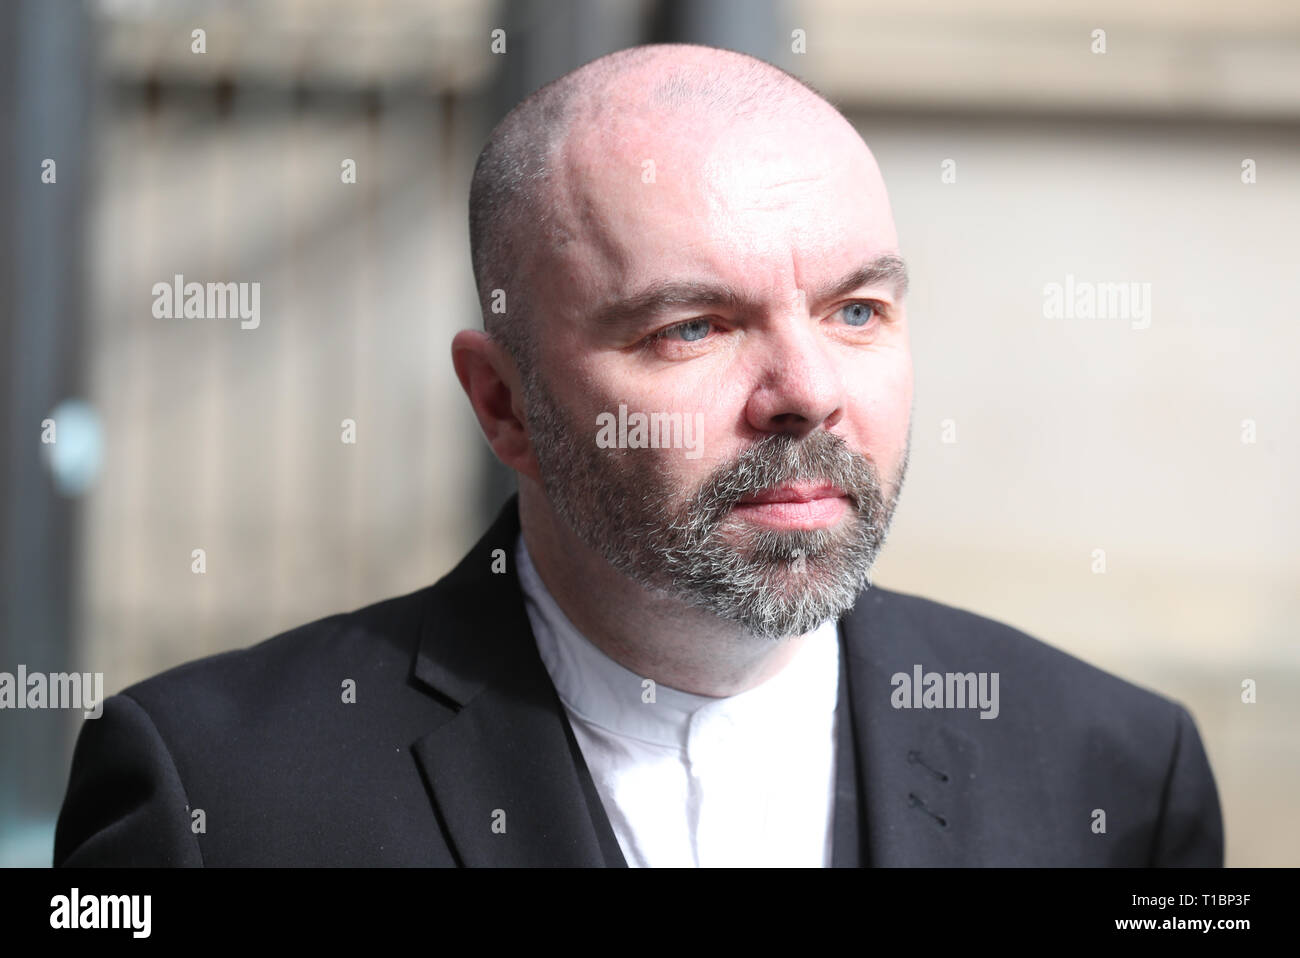 Pro-independence blogger Stuart Campbell from Wings Over Scotland arrives at Edinburgh Sherriff Court where he is taking a defamation action against former Scottish Labour leader Kezia Dugdale, who he claims accused him of homophobic comments on social media. Stock Photo